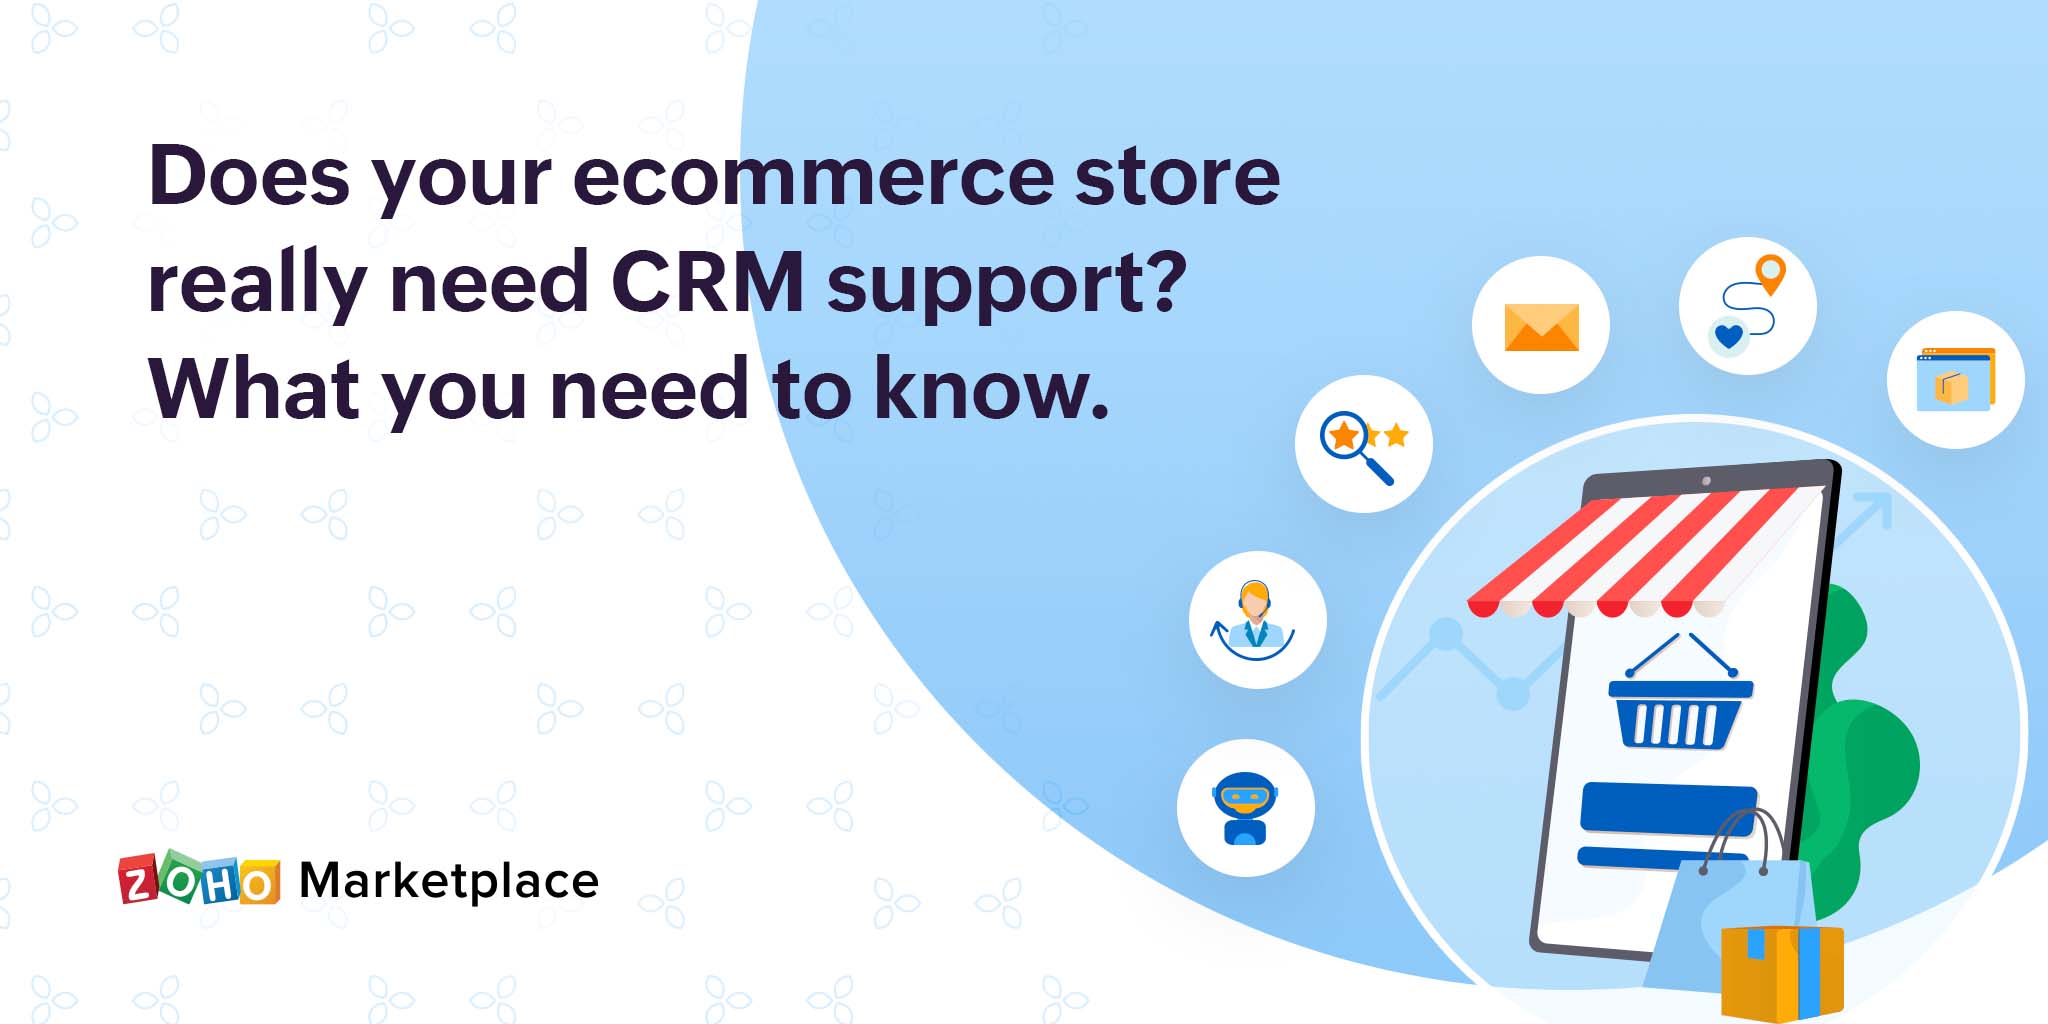 Does your ecommerce store really need CRM support? What you need to know.